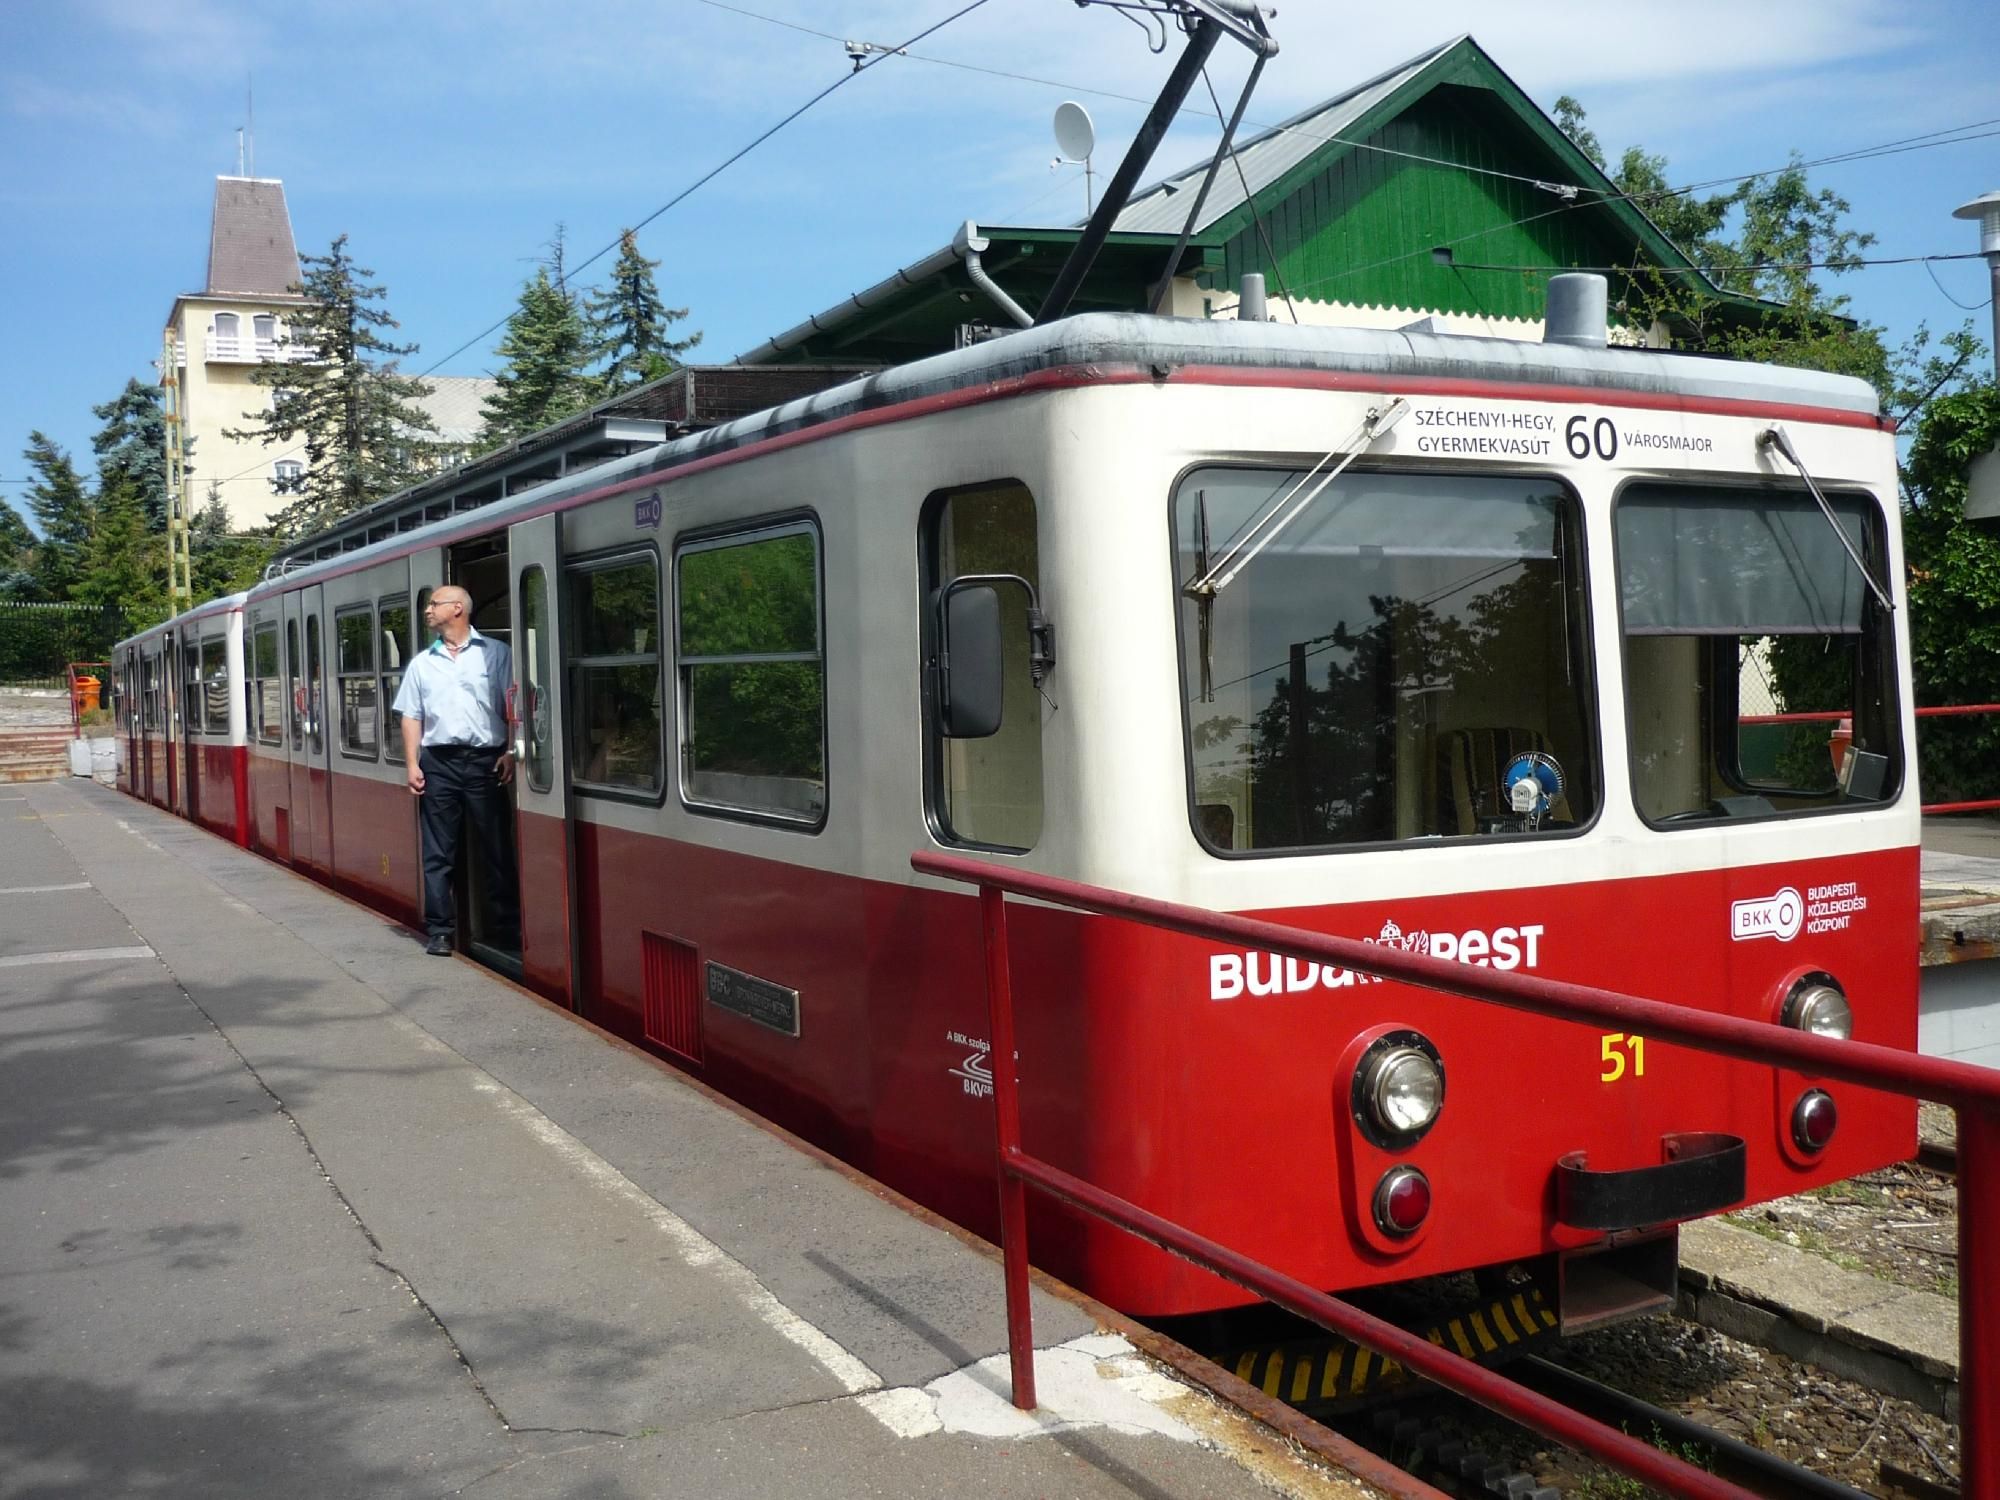 The cog-wheel railway arriving to the terminal, Budapest